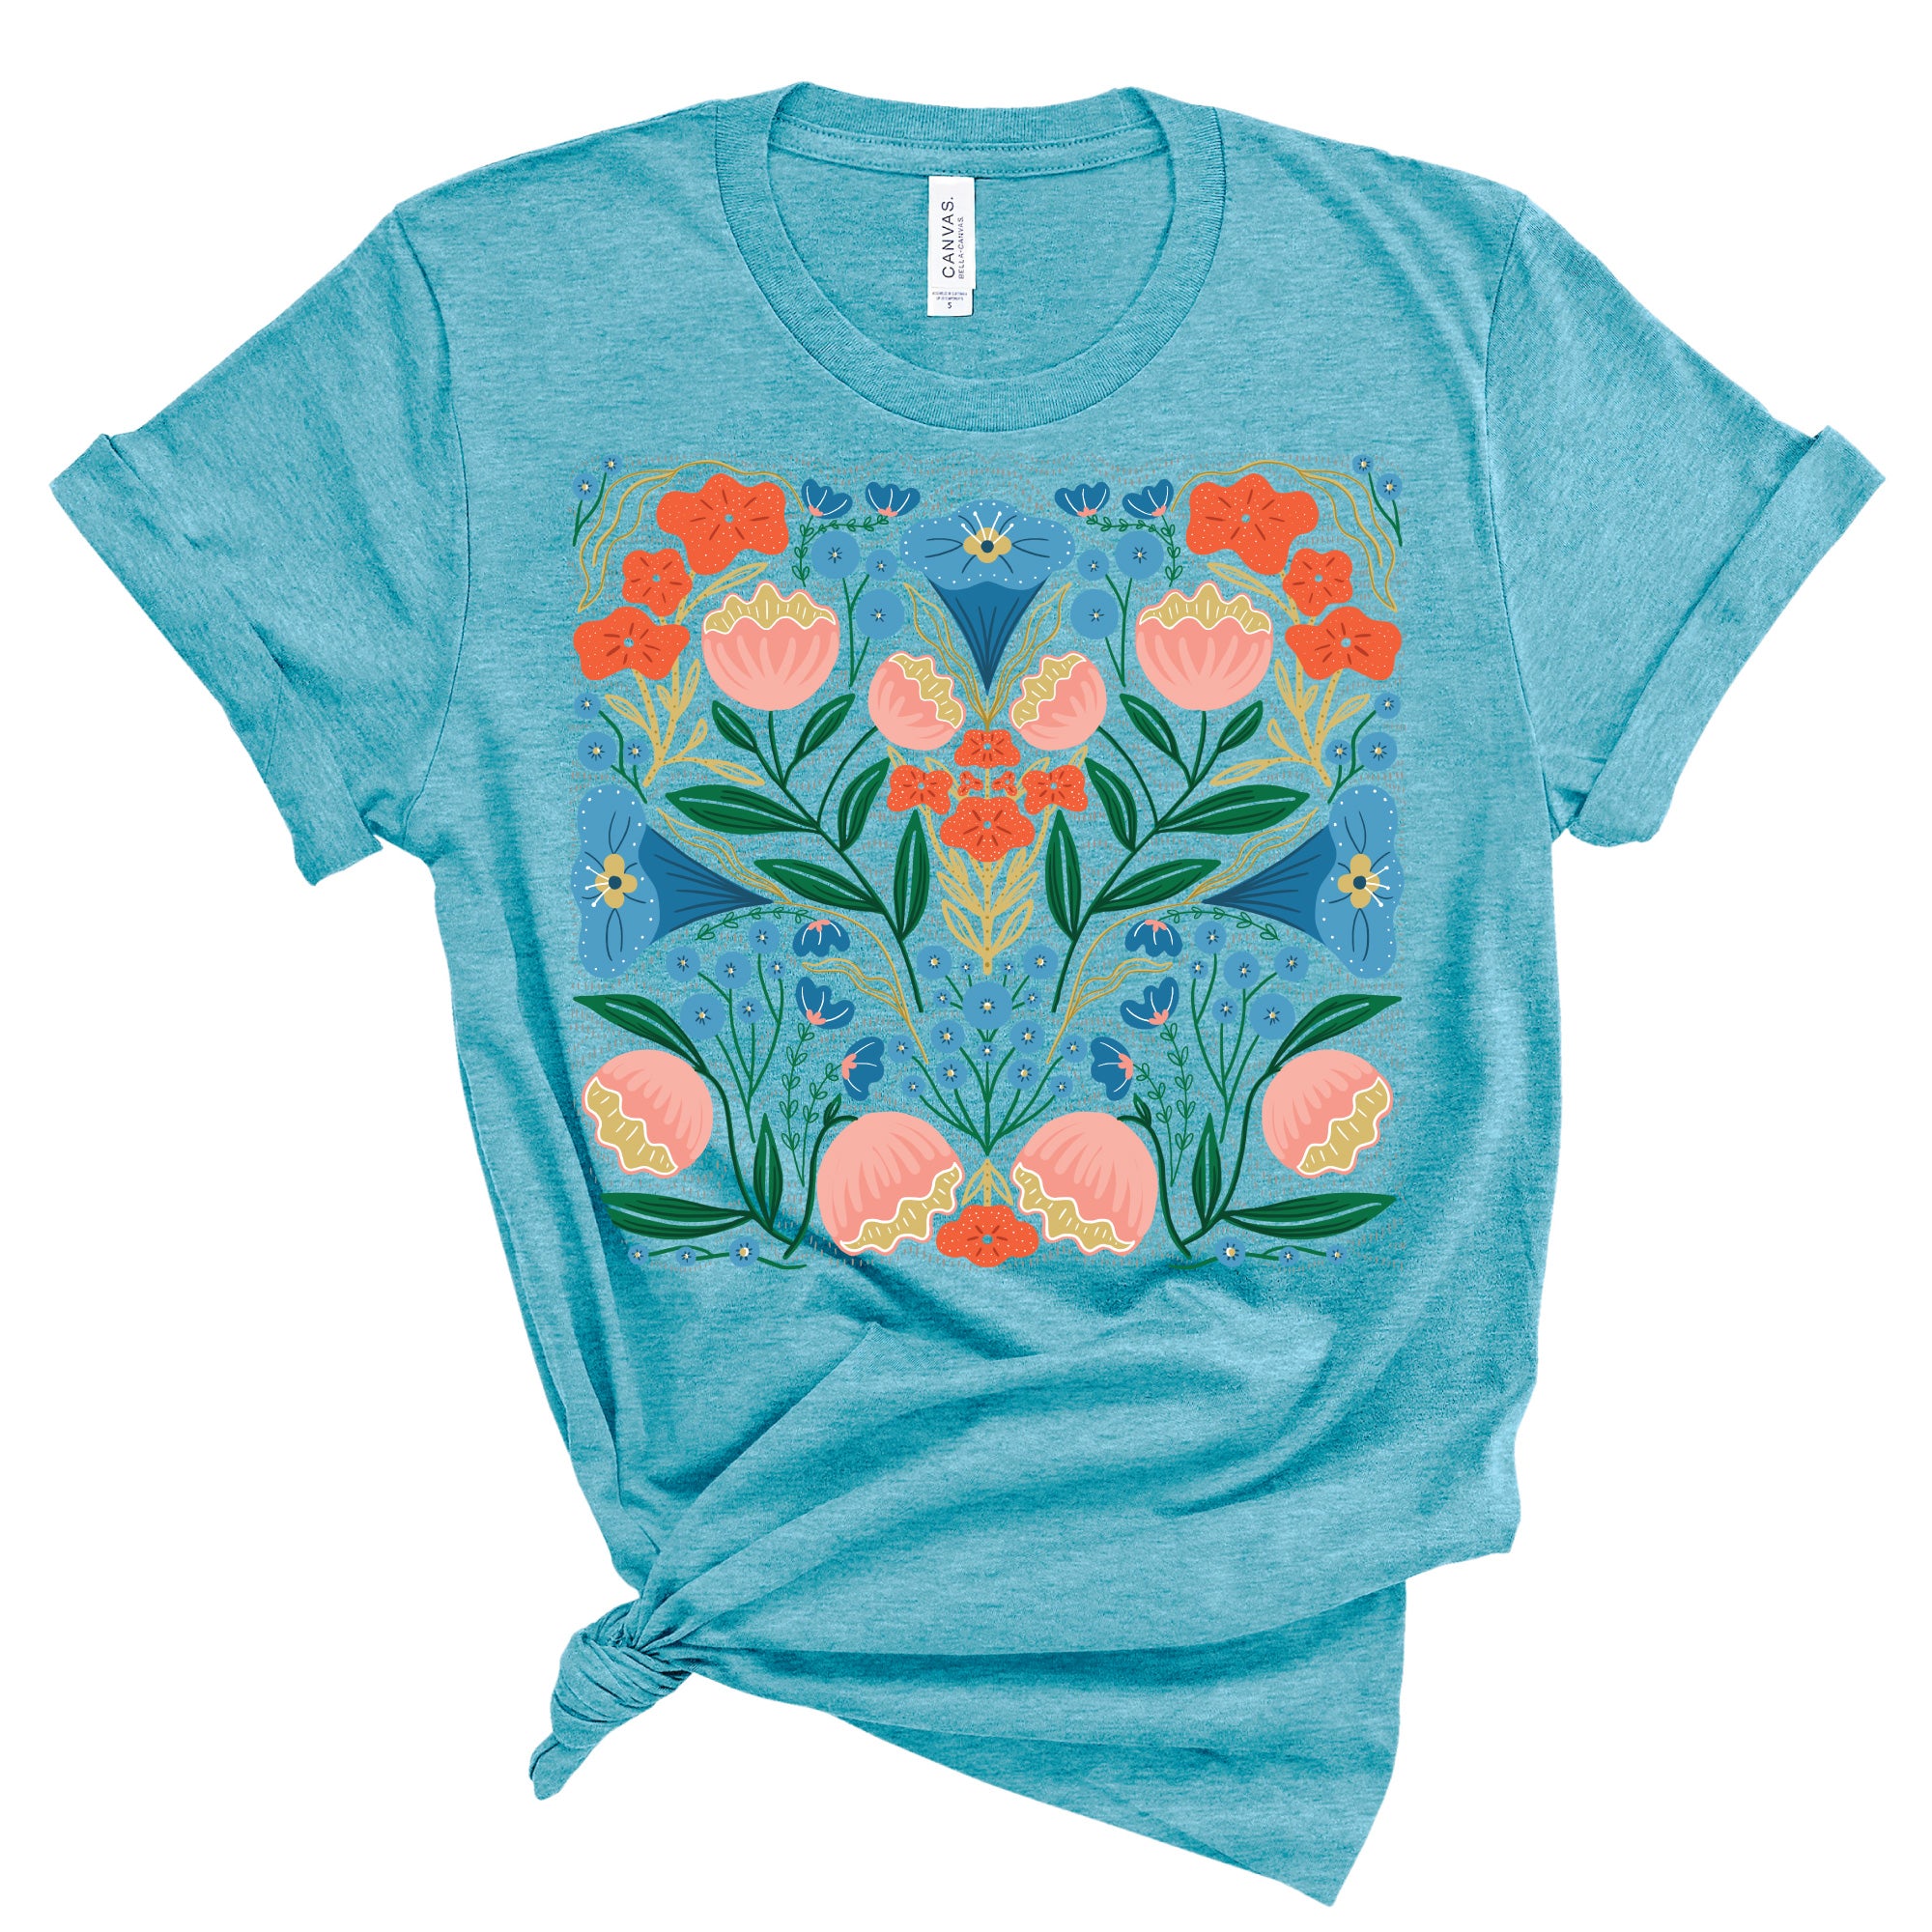 Nocturnal Blooms Tee / T Shirt